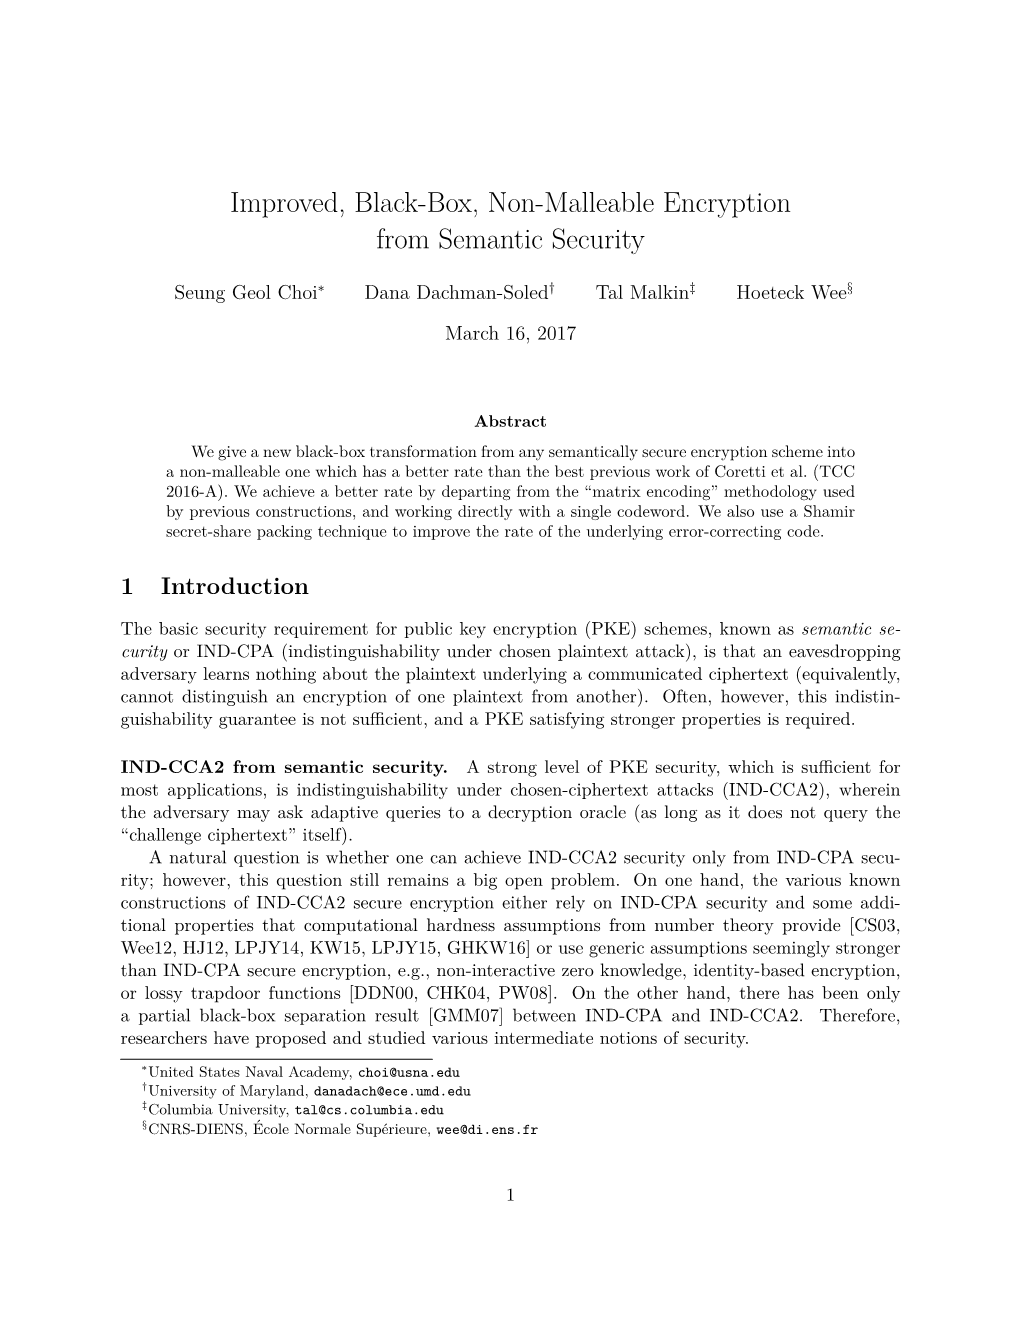 Improved, Black-Box, Non-Malleable Encryption from Semantic Security